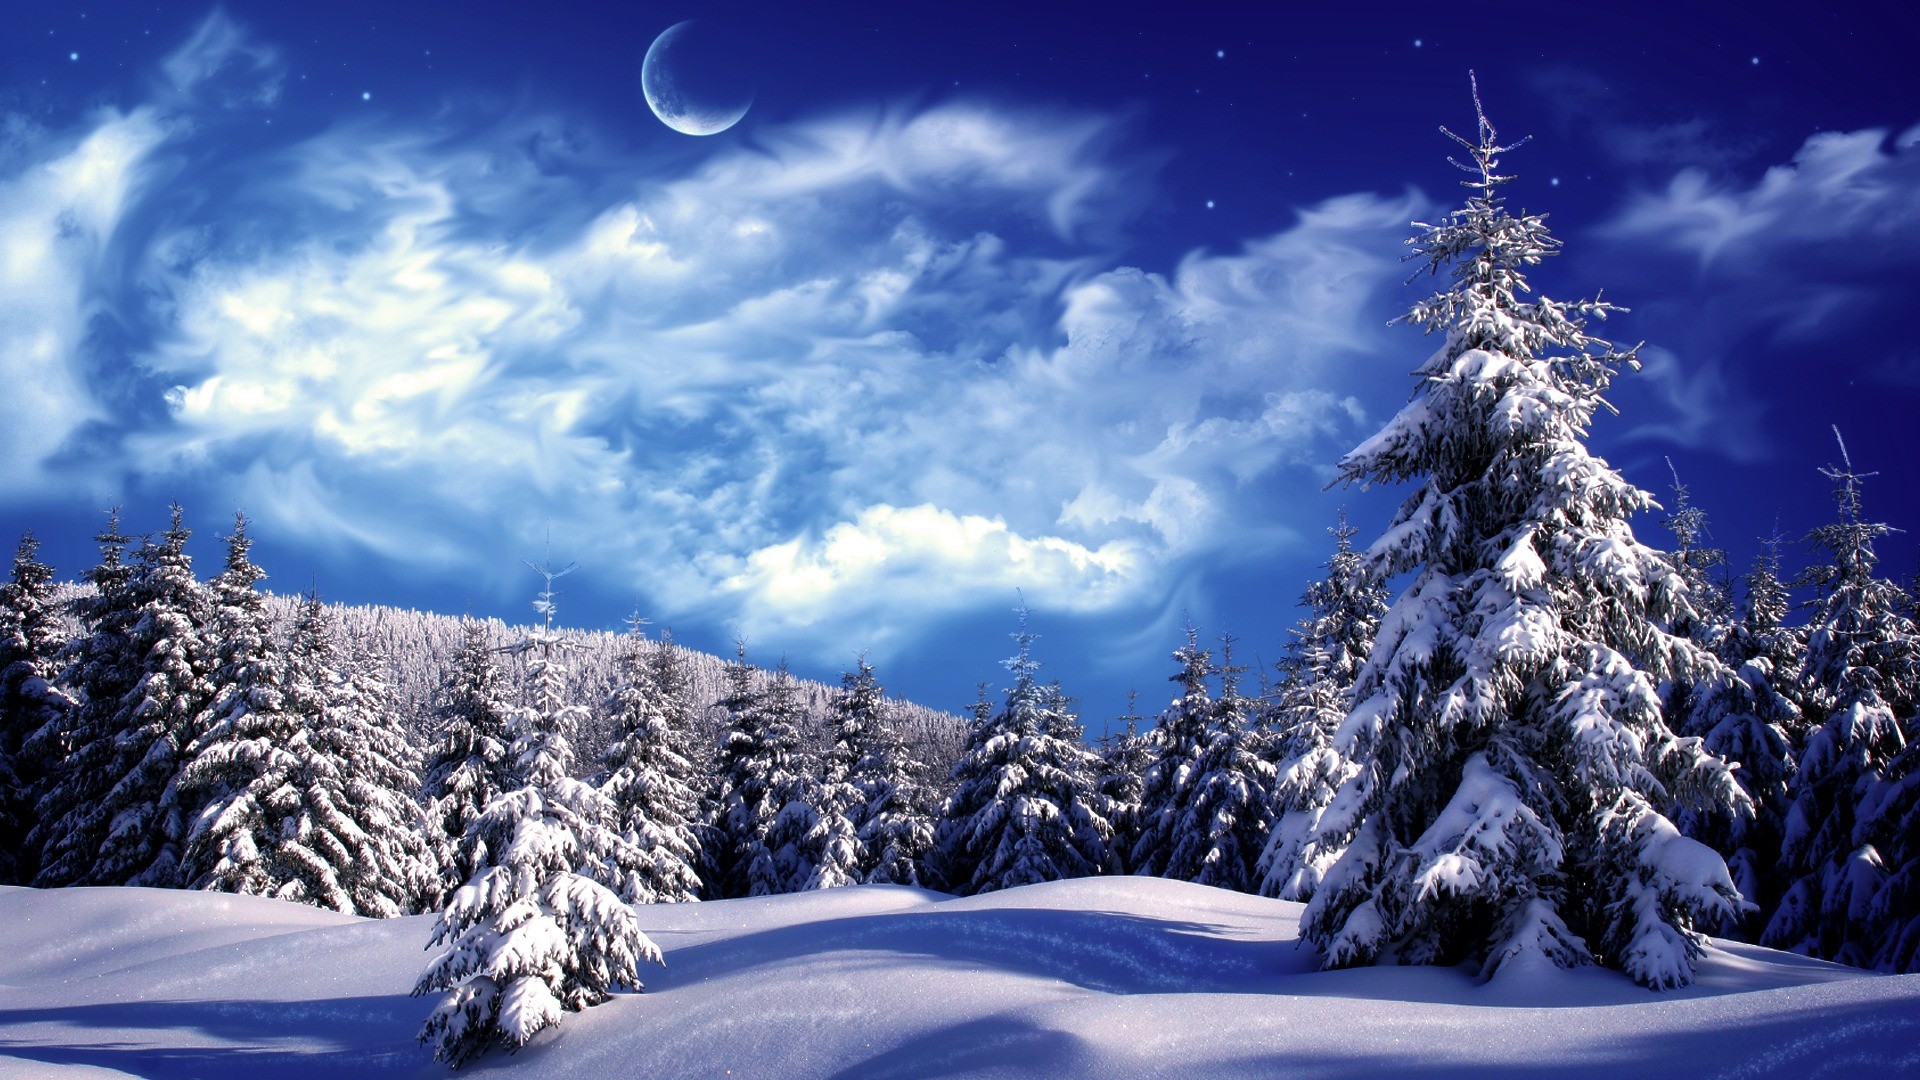 1920x1080 Winter Wallpapers, February 18, 2015 0.69 Mb